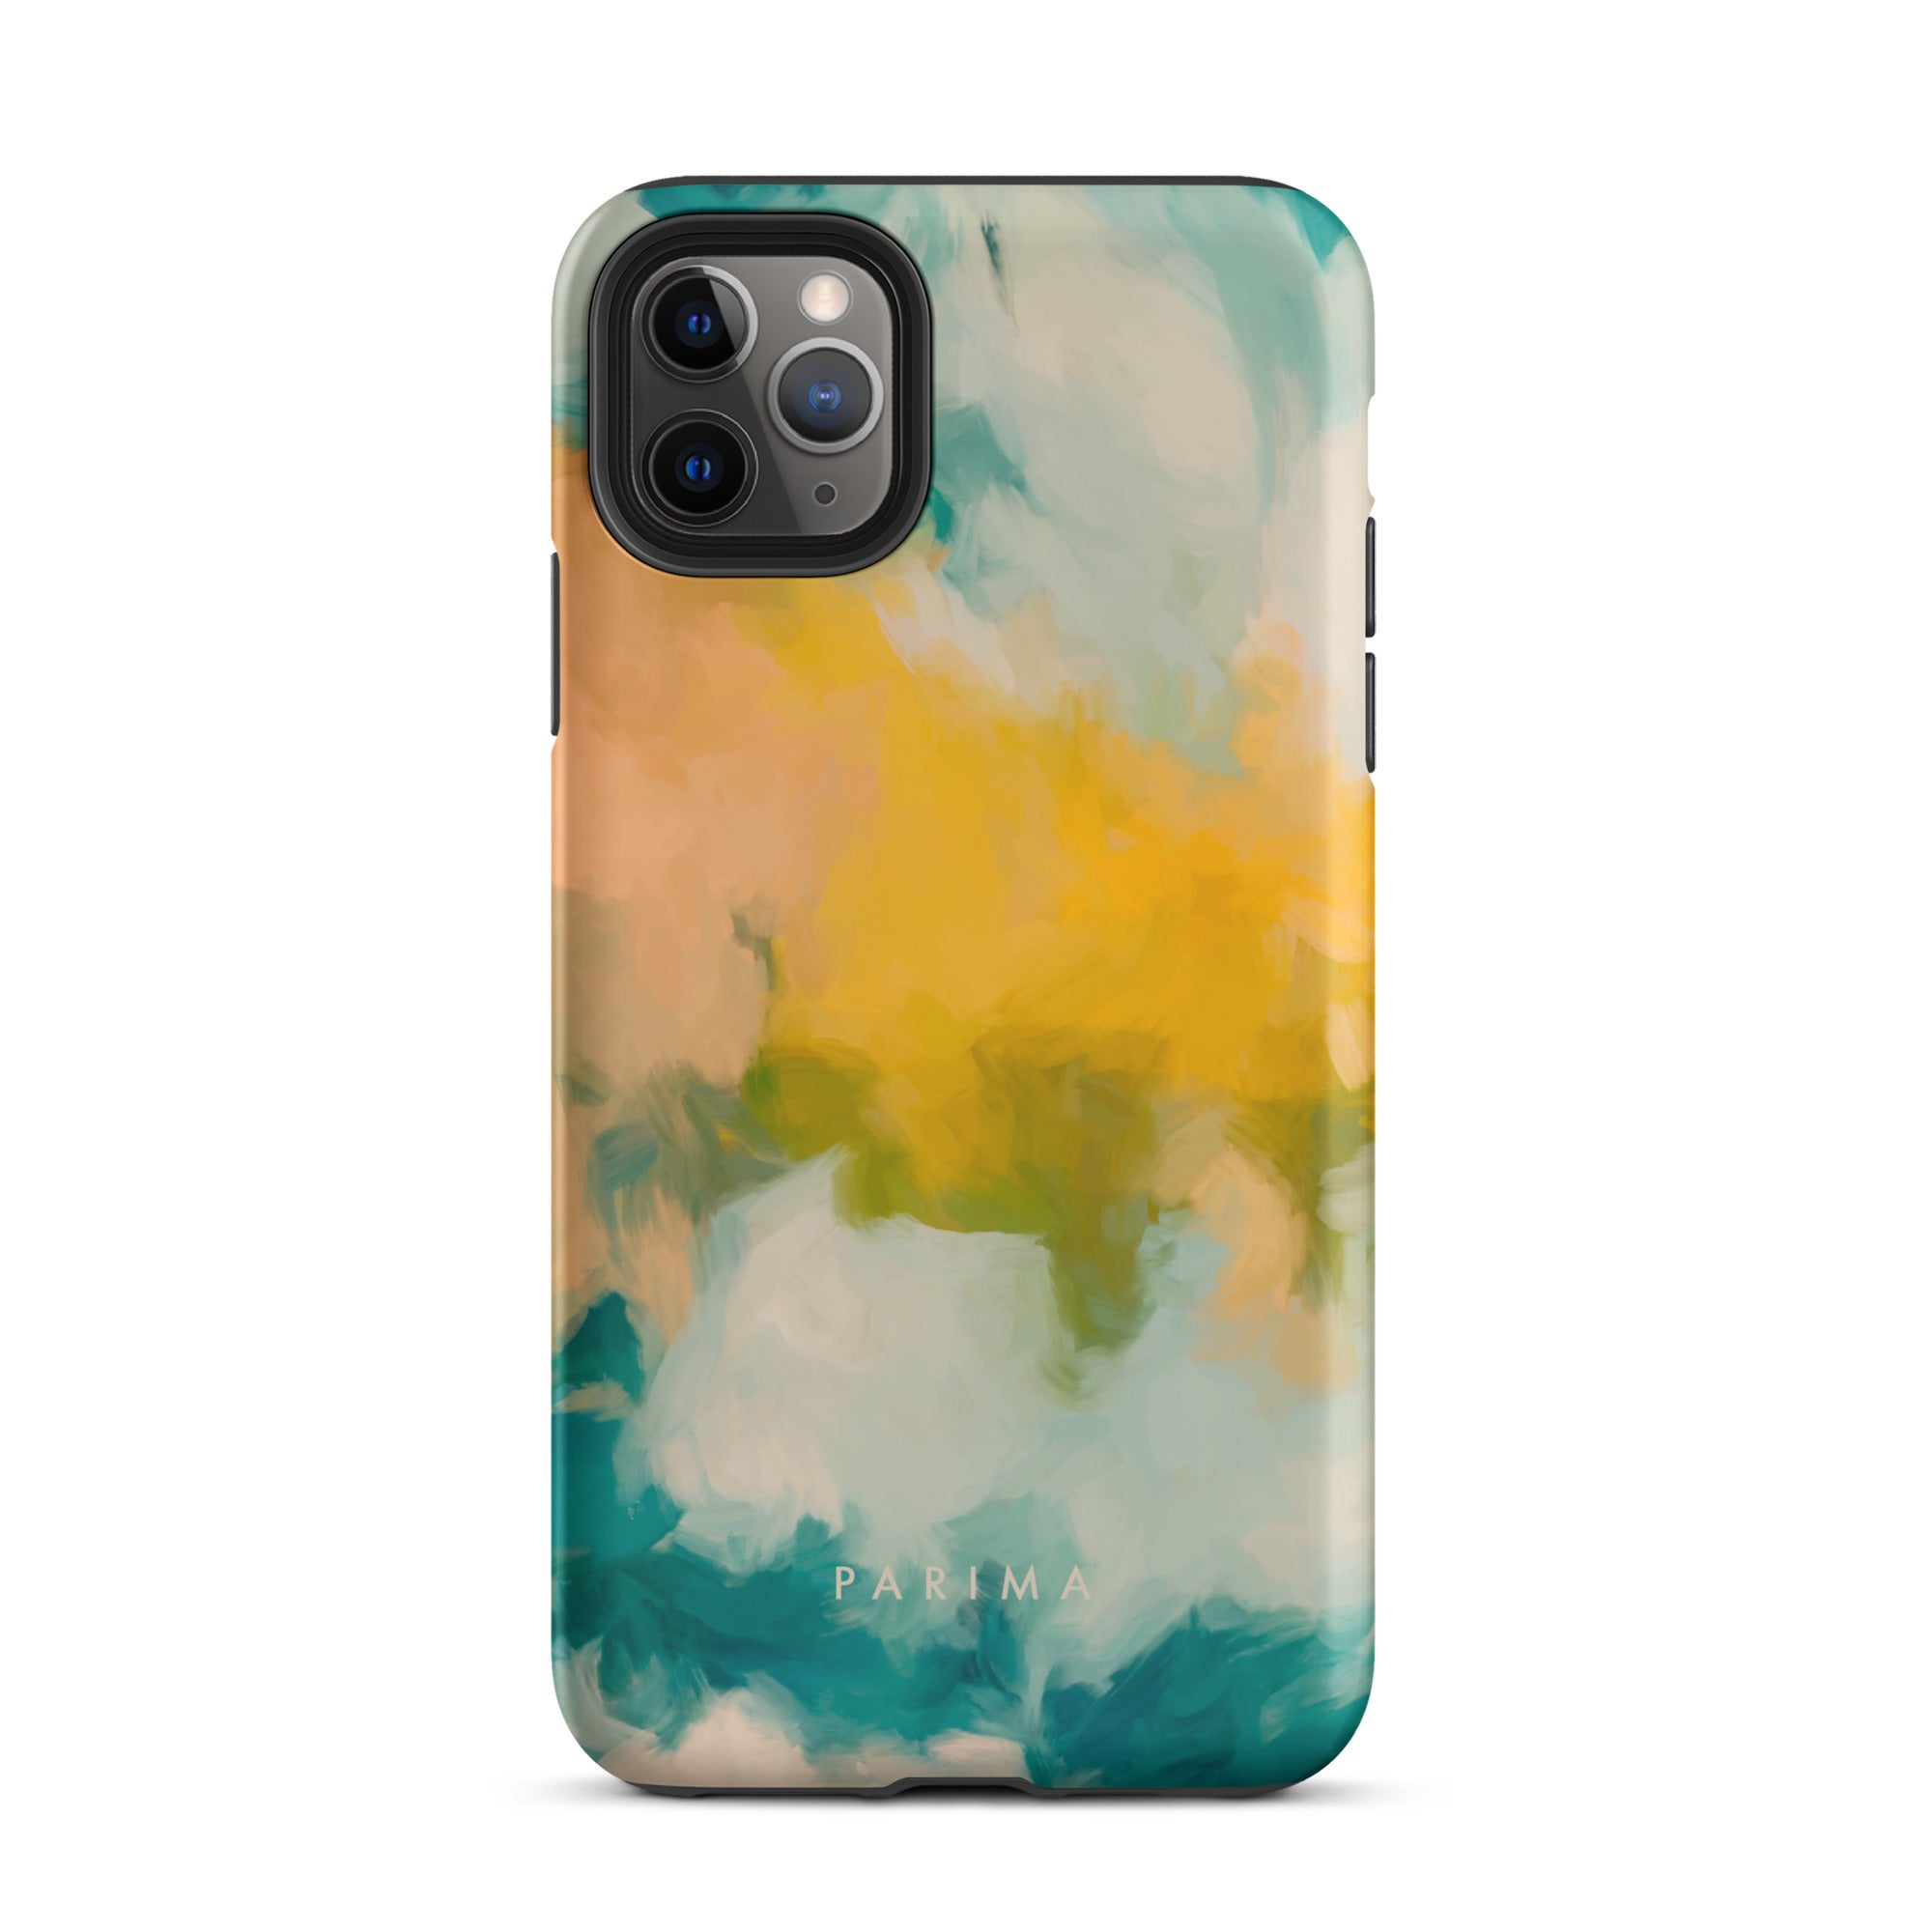 Beach Day, blue and yellow abstract art - iPhone 11 Pro Max tough case by Parima Studio